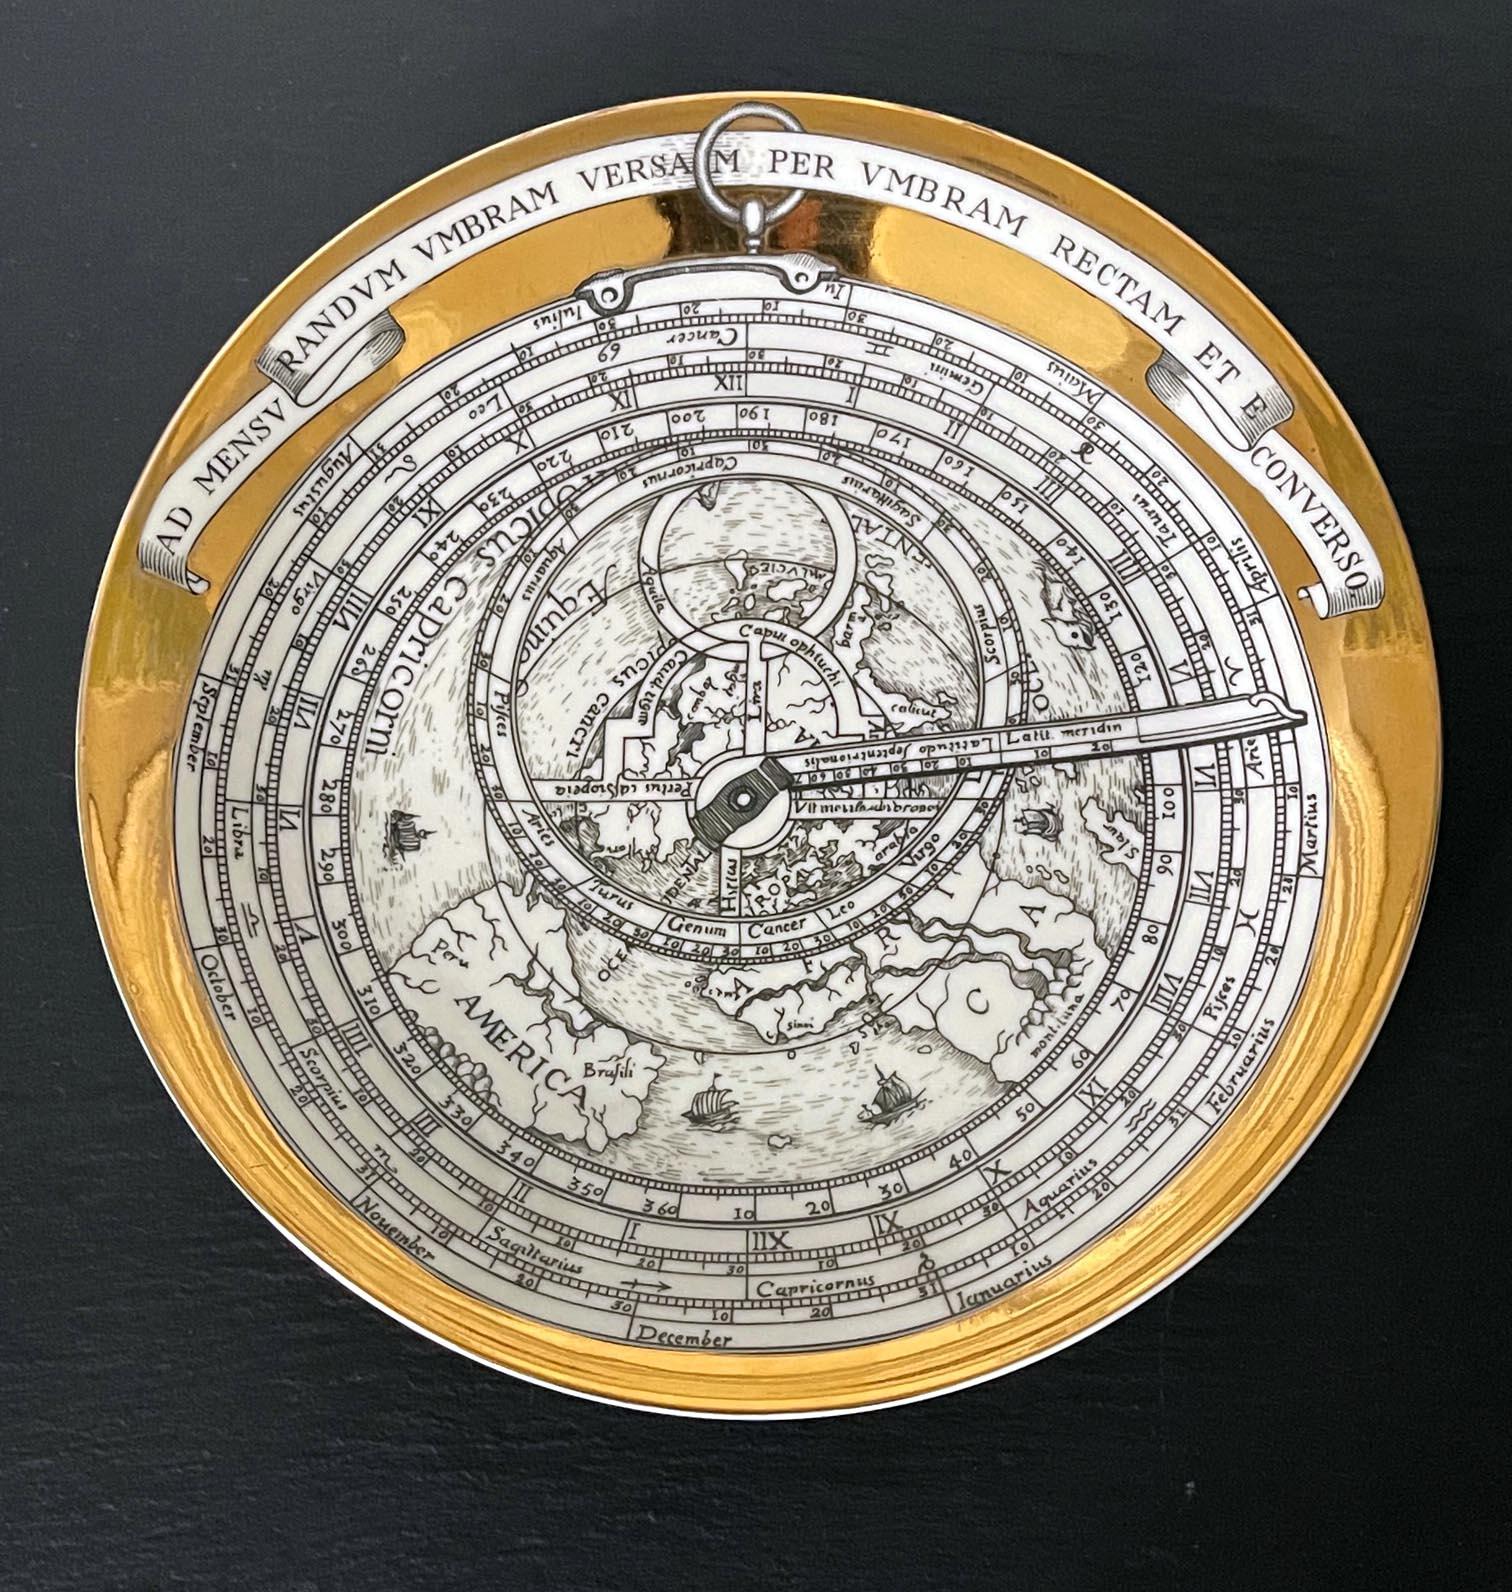 A porcelain plate designed by Piero Fornasetti as no.4 of the twelves-piece set of the Astrolabe series between 1965-1976. The series each depicts an Astrolabio, an elaborate inclinometer of classical antiquity time used by astronomers, navigators,